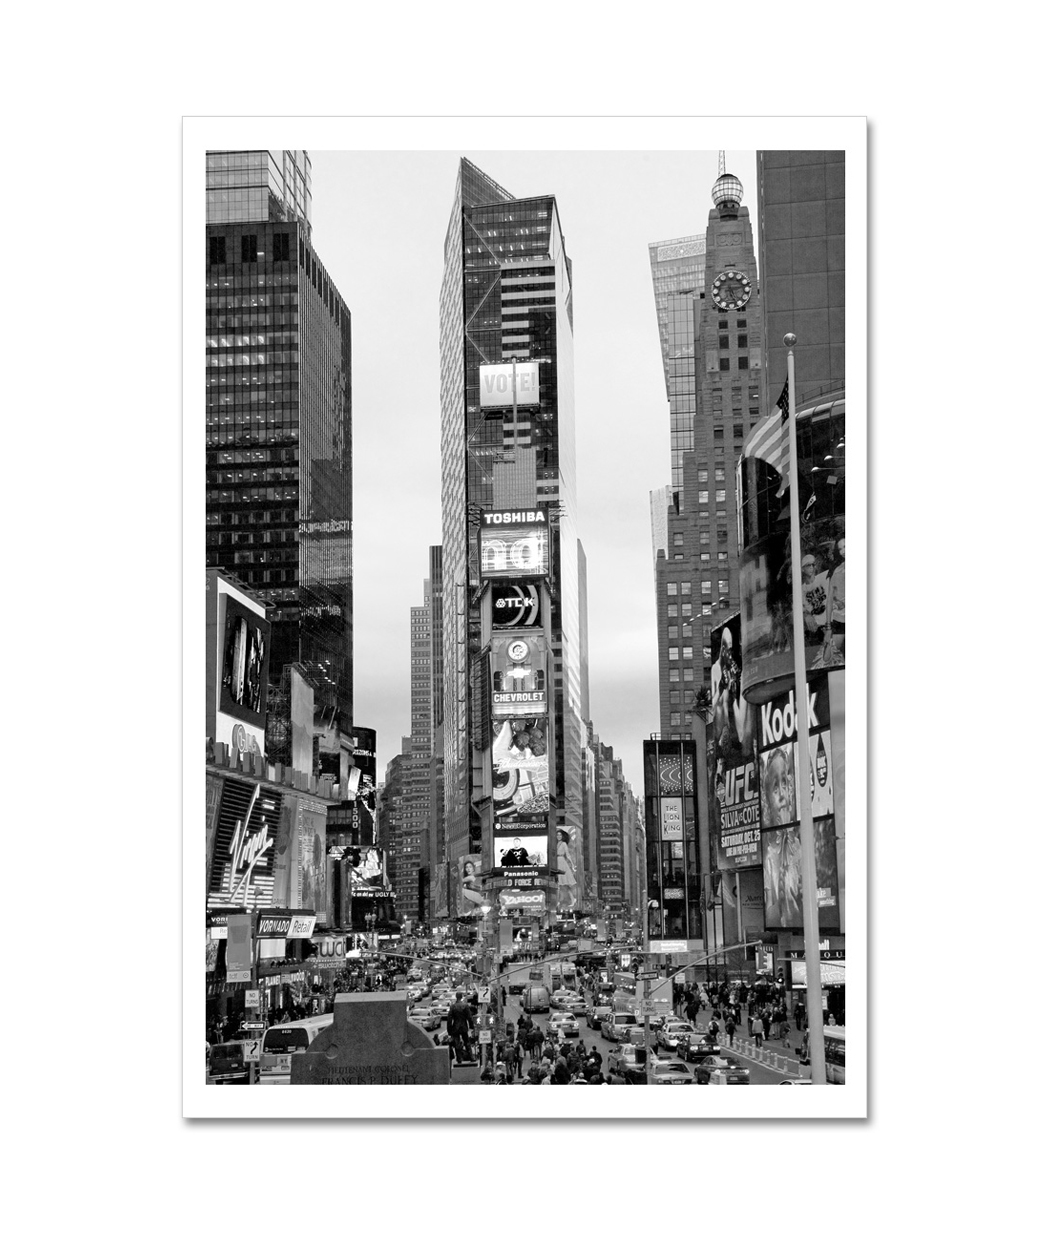 South Black and White New York – Art Photo Print Poster – NY Poster Inc